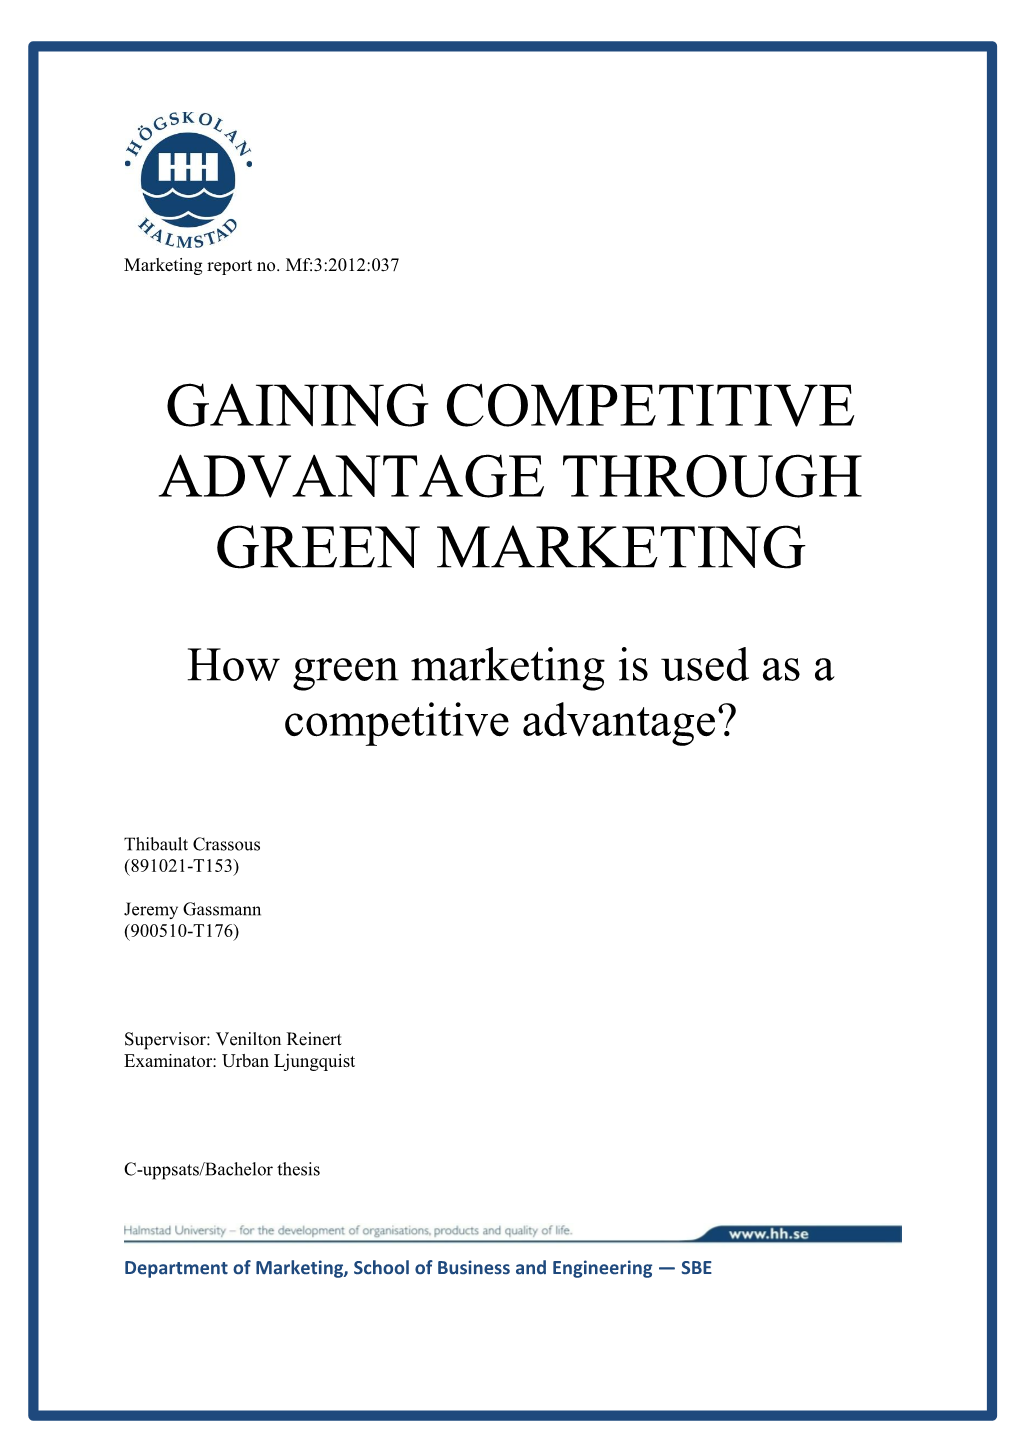 How Green Marketing Is Used As a Competitive Advantage?